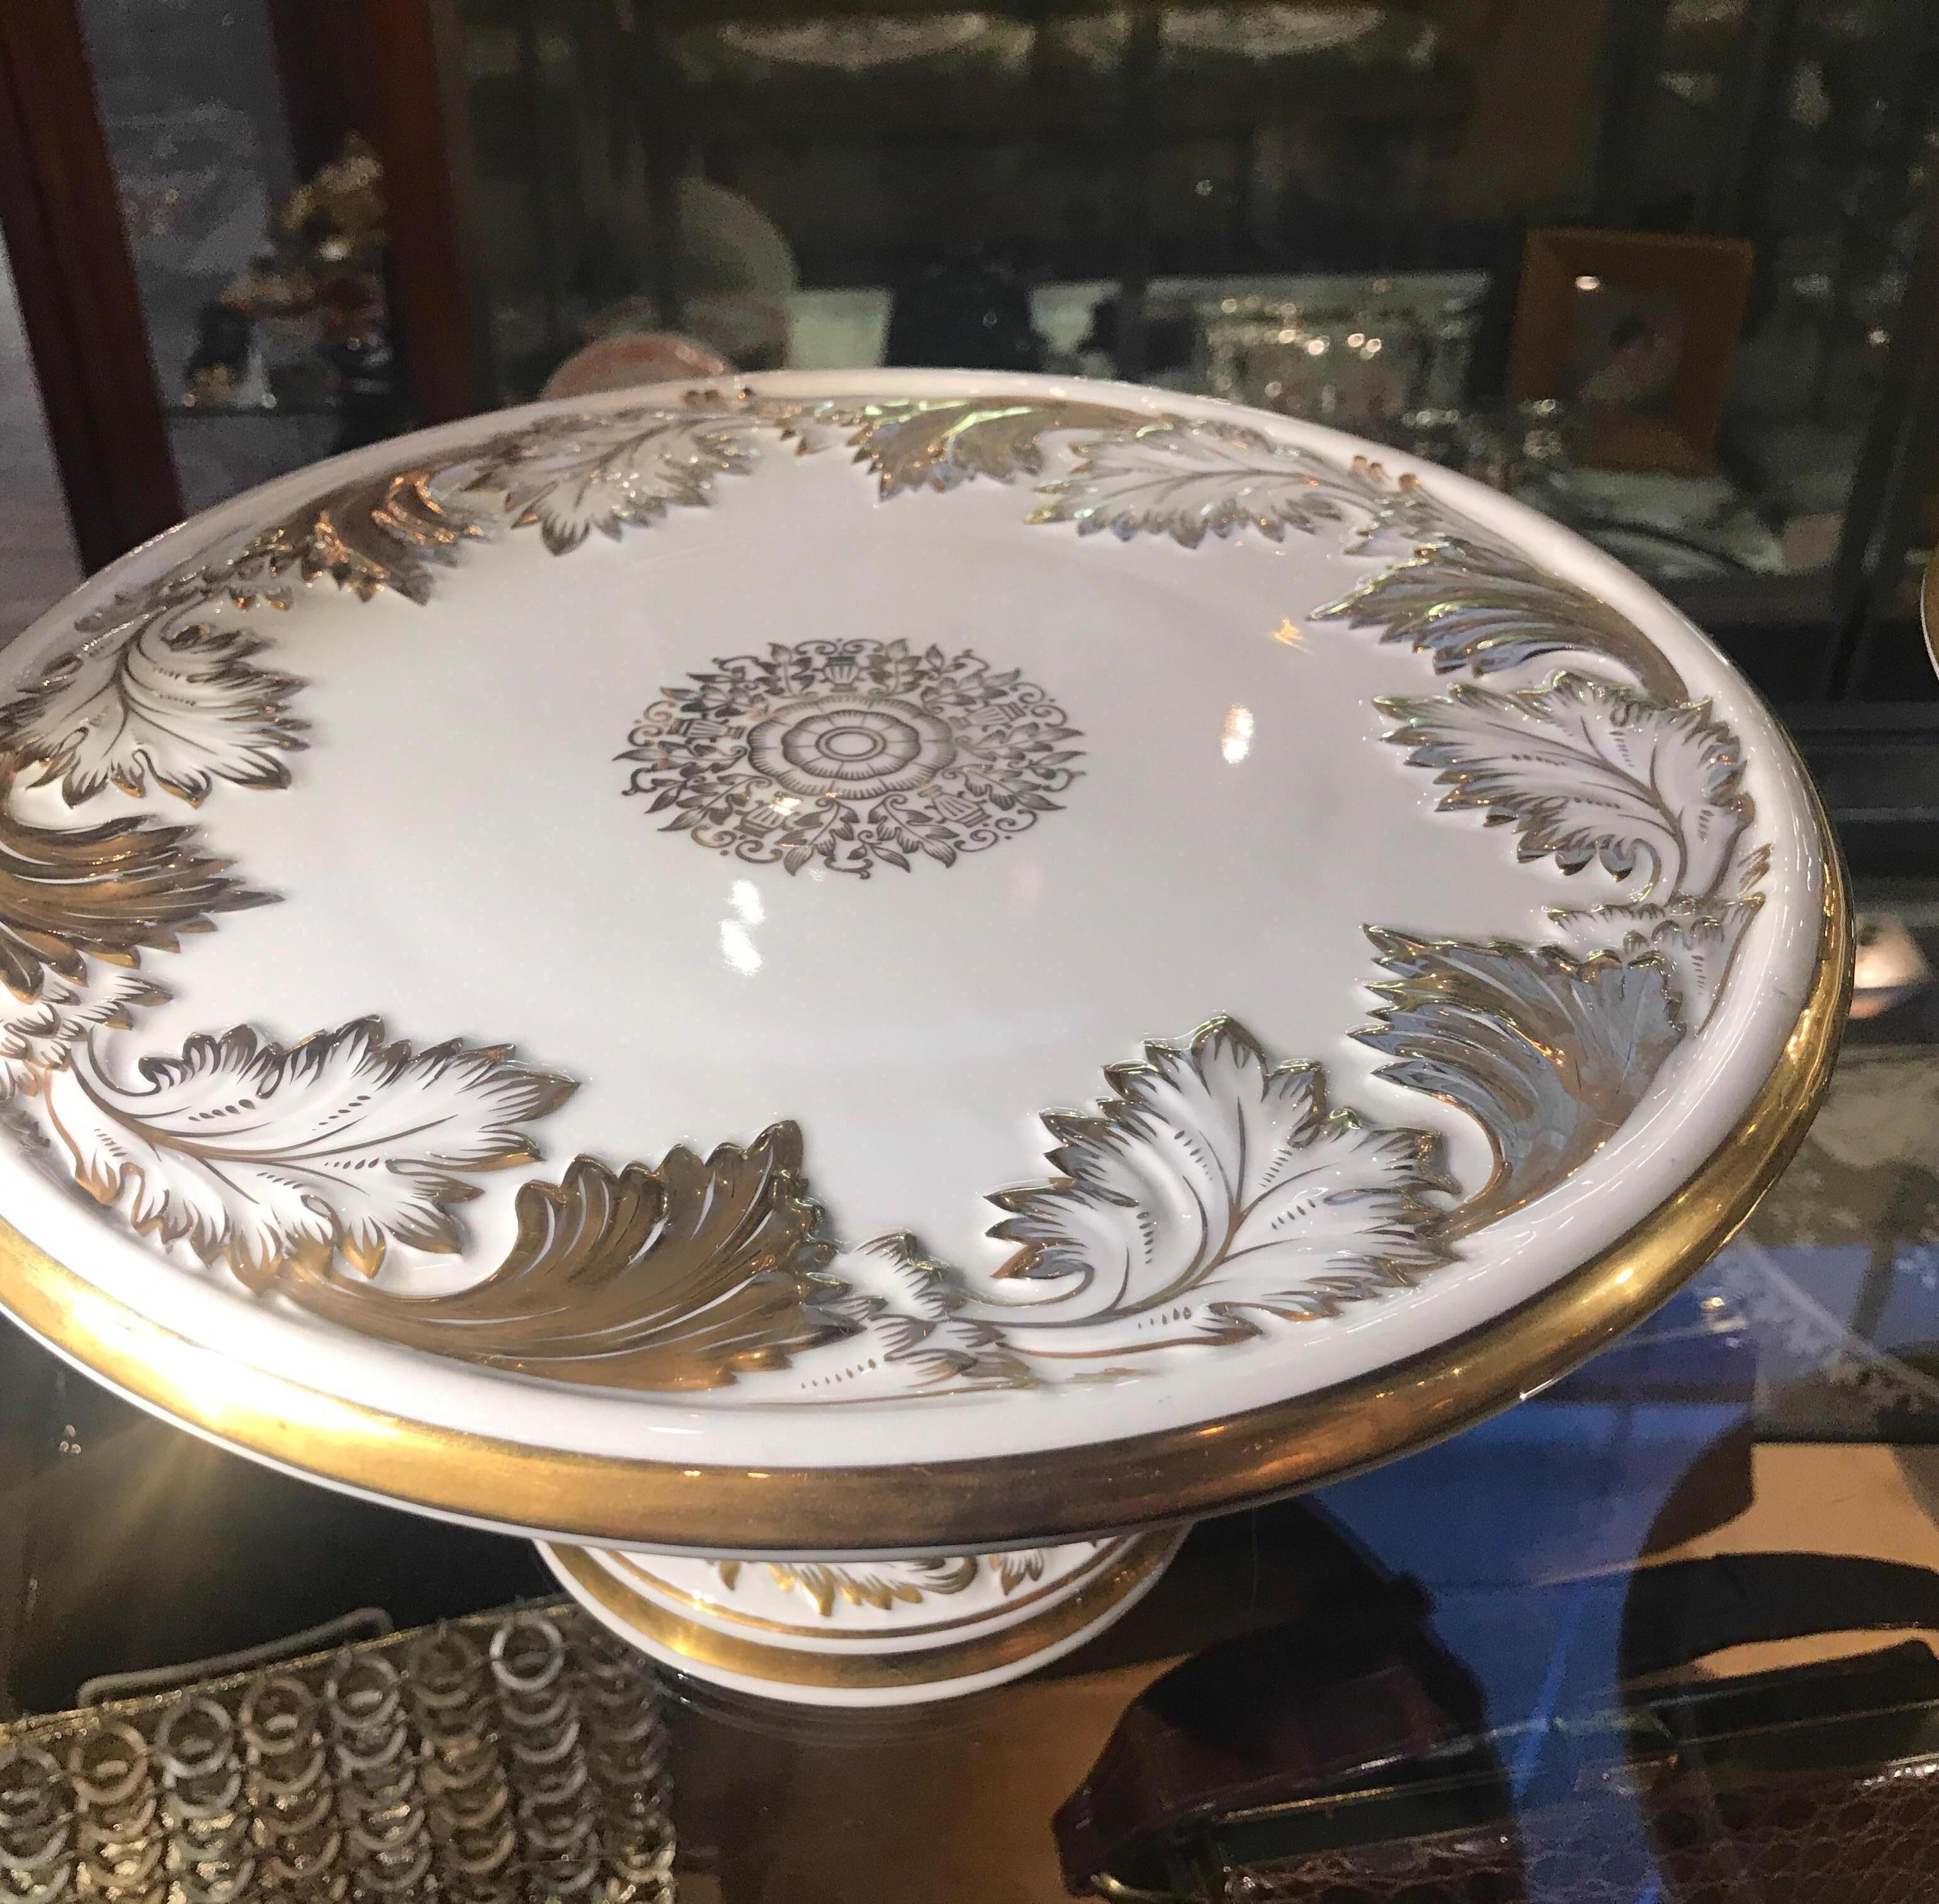 A pair of 19th century Nymphenburg porcelain and gilt pedestal compote cake stands. The white porcelain background with raised leaf decoration hand gilt on the edges. The blue shield mark, under-glaze is from the 1890s
The Nymphenburg porcelain